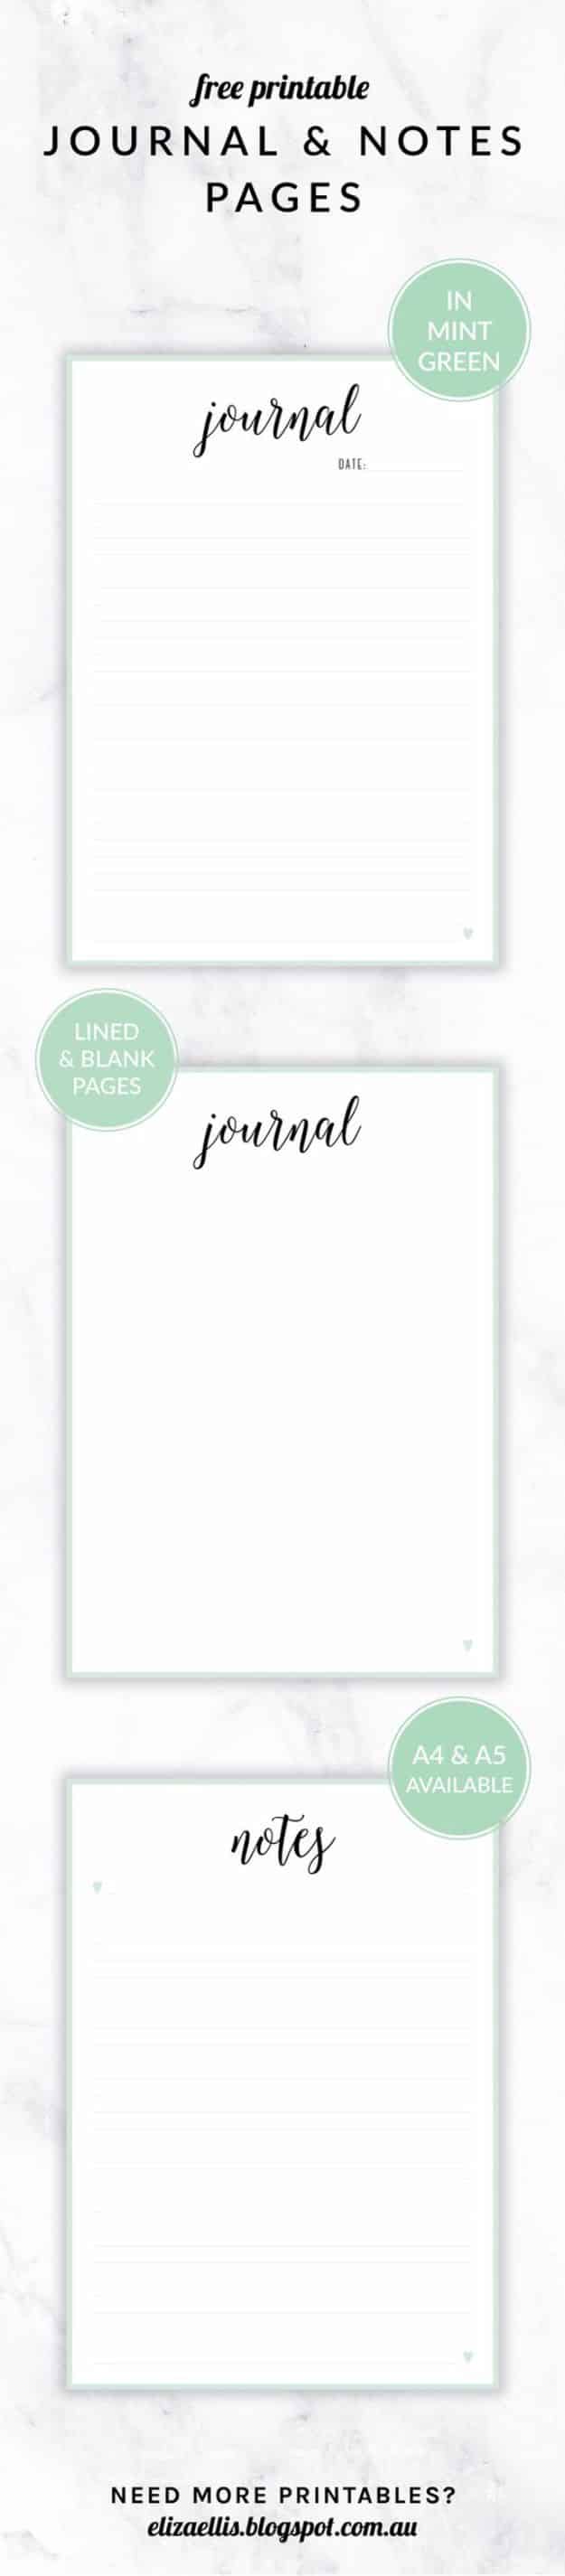 Best Free Printables for Crafts - Free Printable Journal Notes Pages - Quotes, Templates, Paper Projects and Cards, DIY Gifts Cards, Stickers and Wall Art You Can Print At Home - Use These Fun Do It Yourself Template and Craft Ideas 